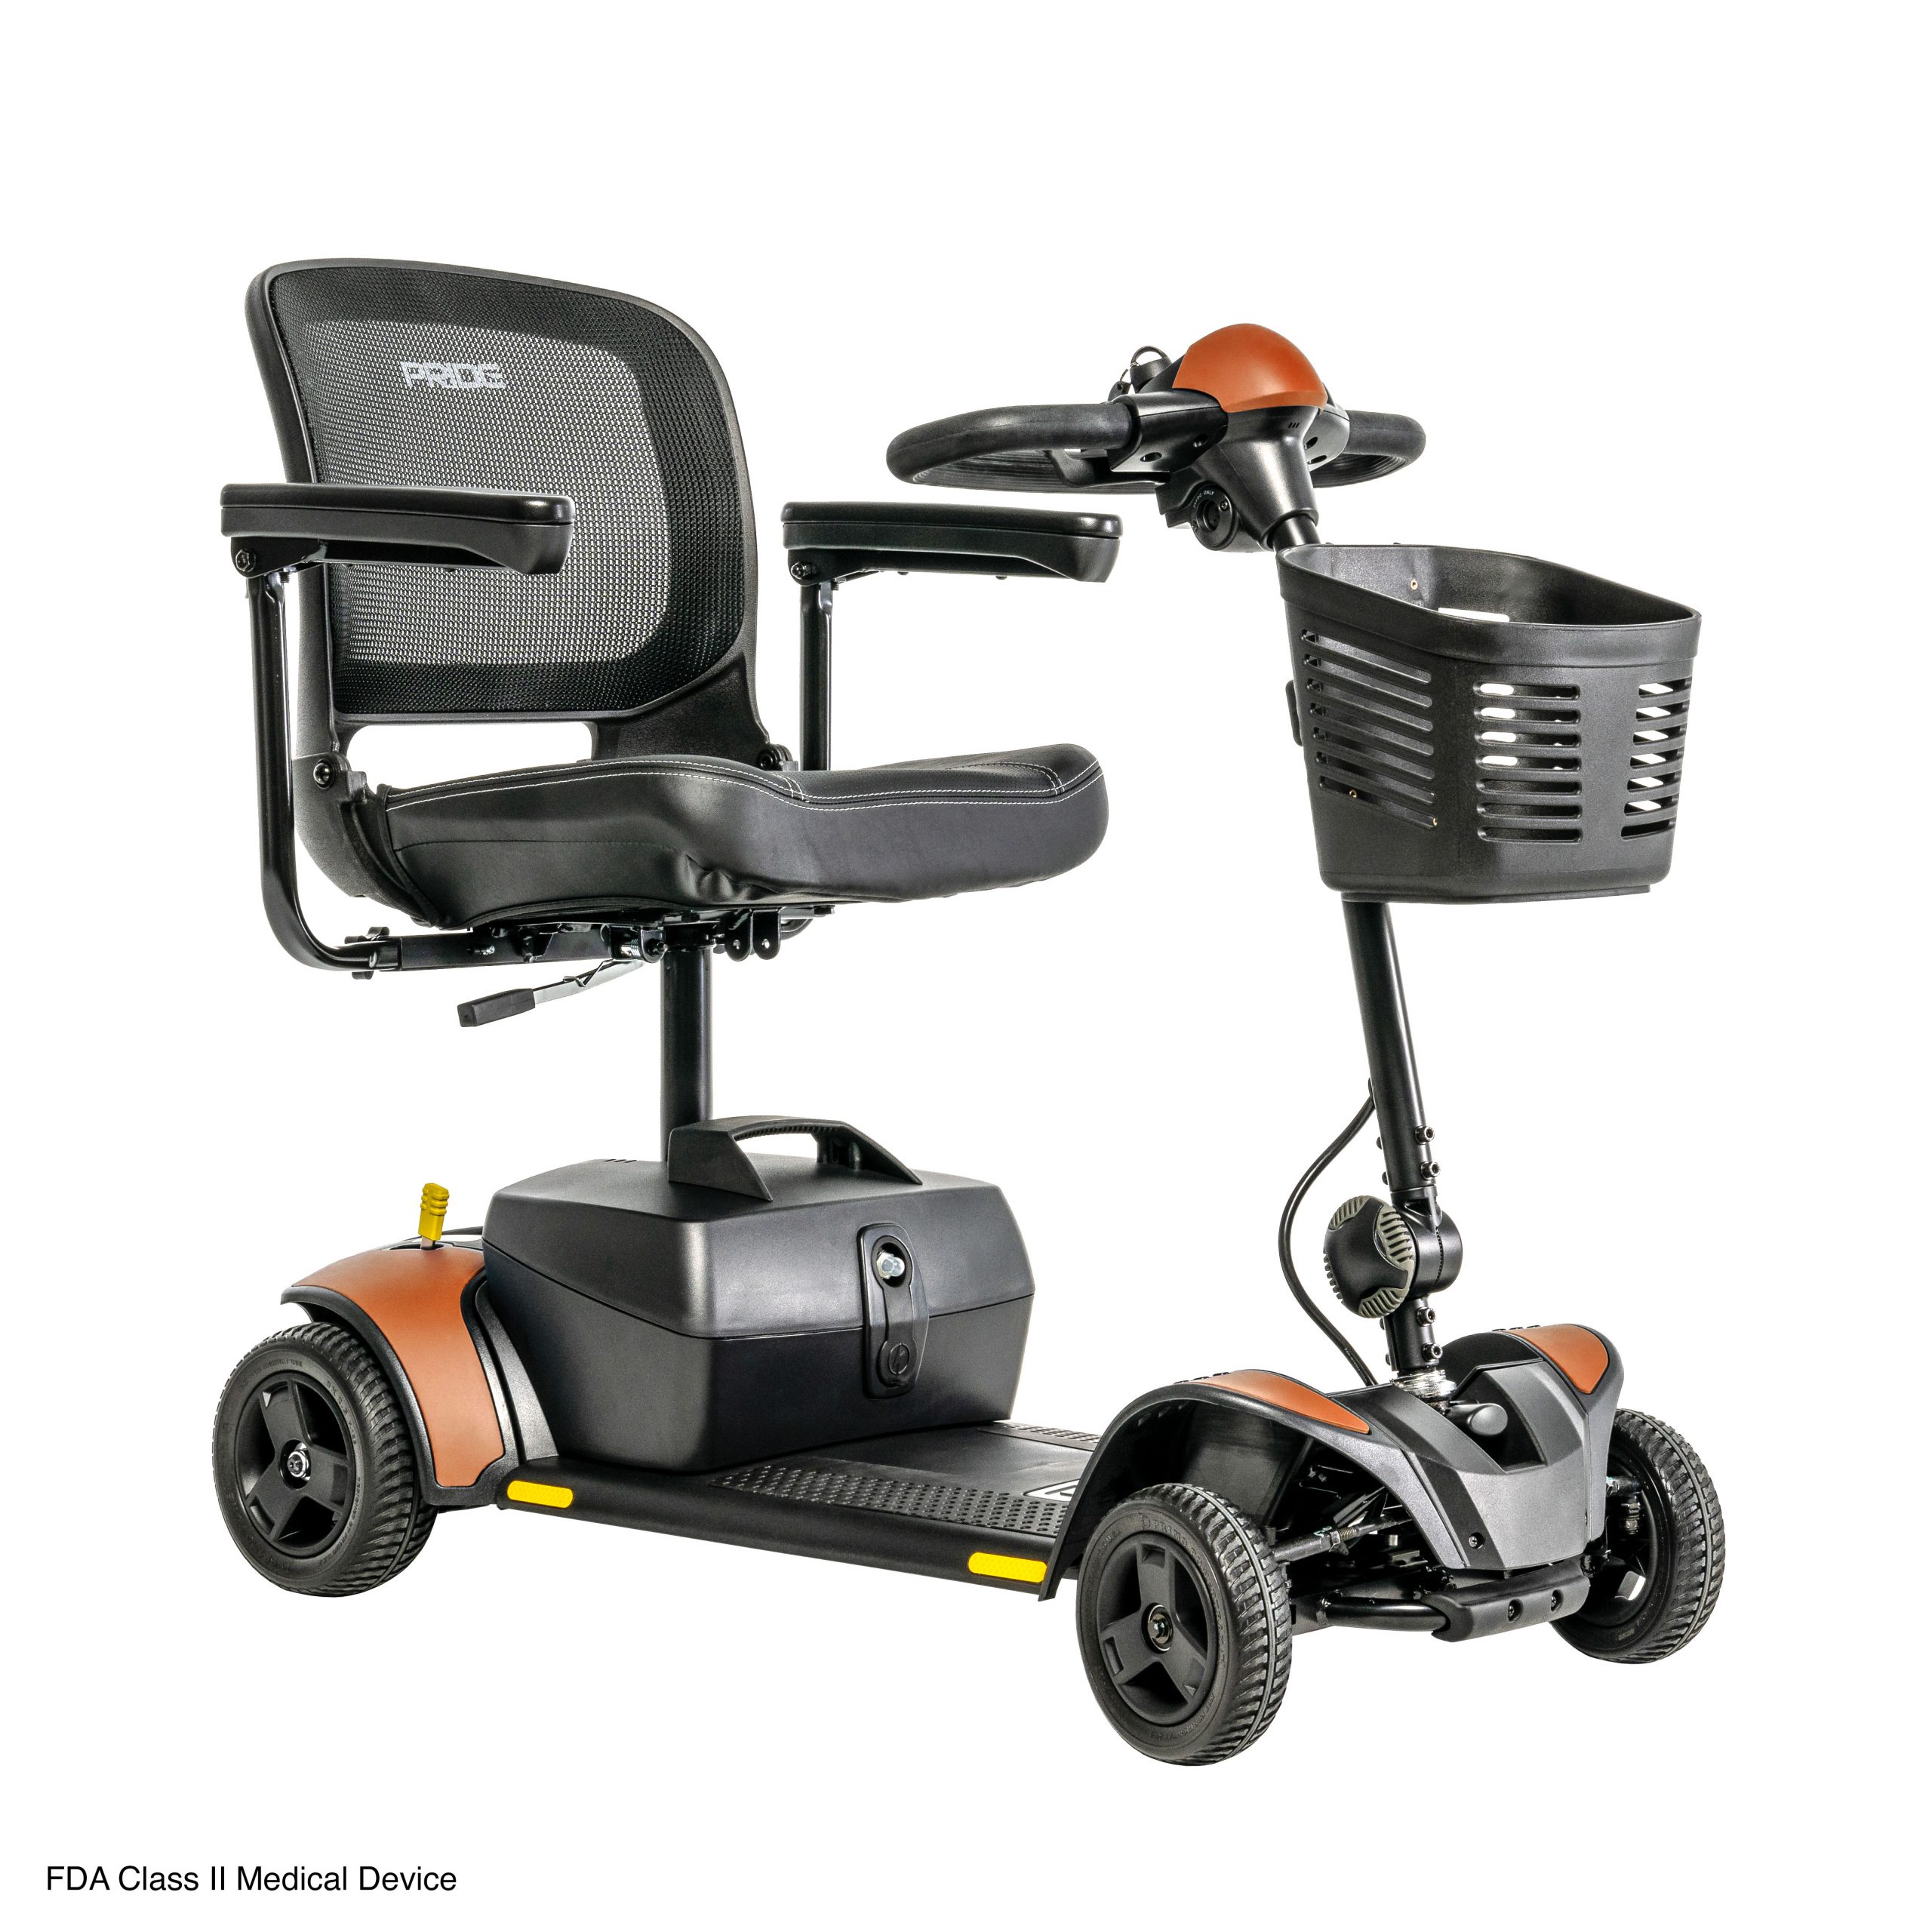 Front right side view of the Tangerine Go-Go Elite Traveller 2 - Four-wheel mobility scooter with a user-friendly control panel, tight turning radius, and a comfortable swivel seat with removable colored panels